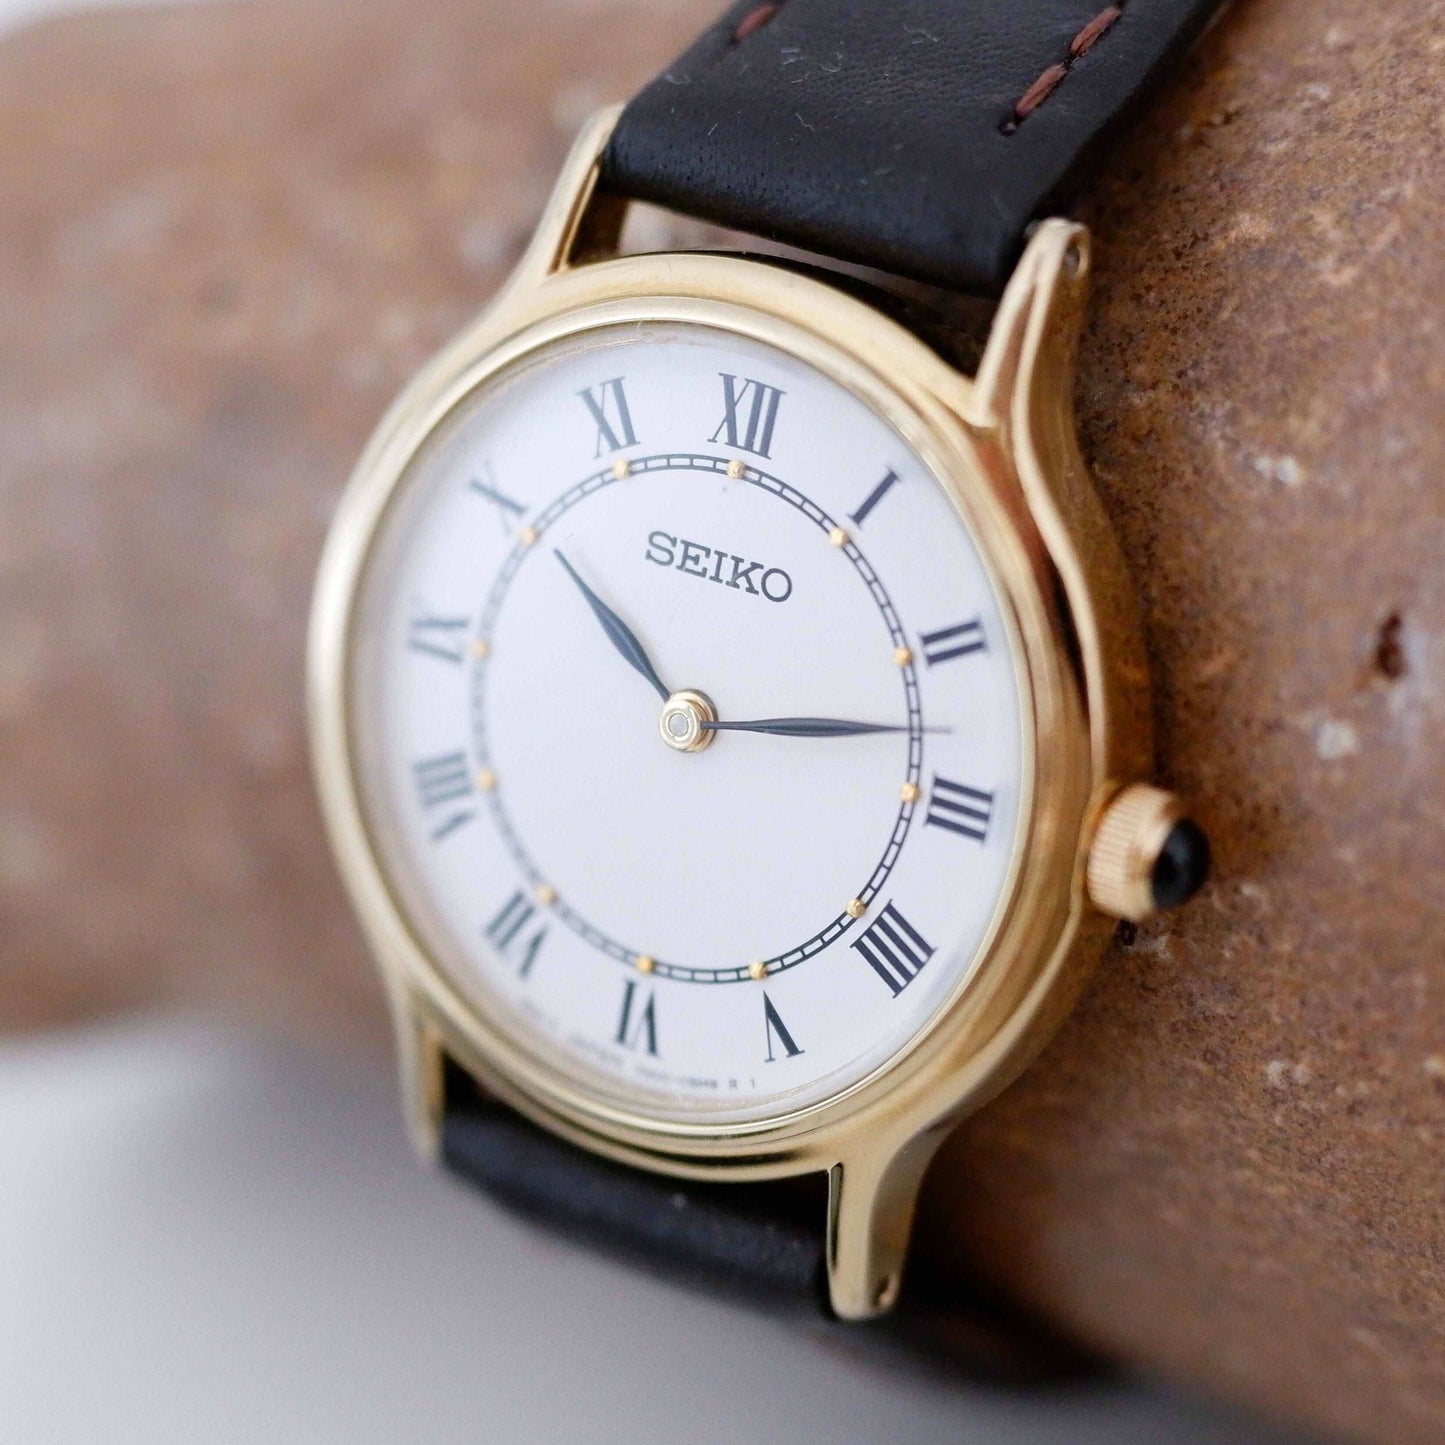 Seiko Vintage Ladies Watch: 90s Gold with Elegant Roman Numerals, Slight Right Side